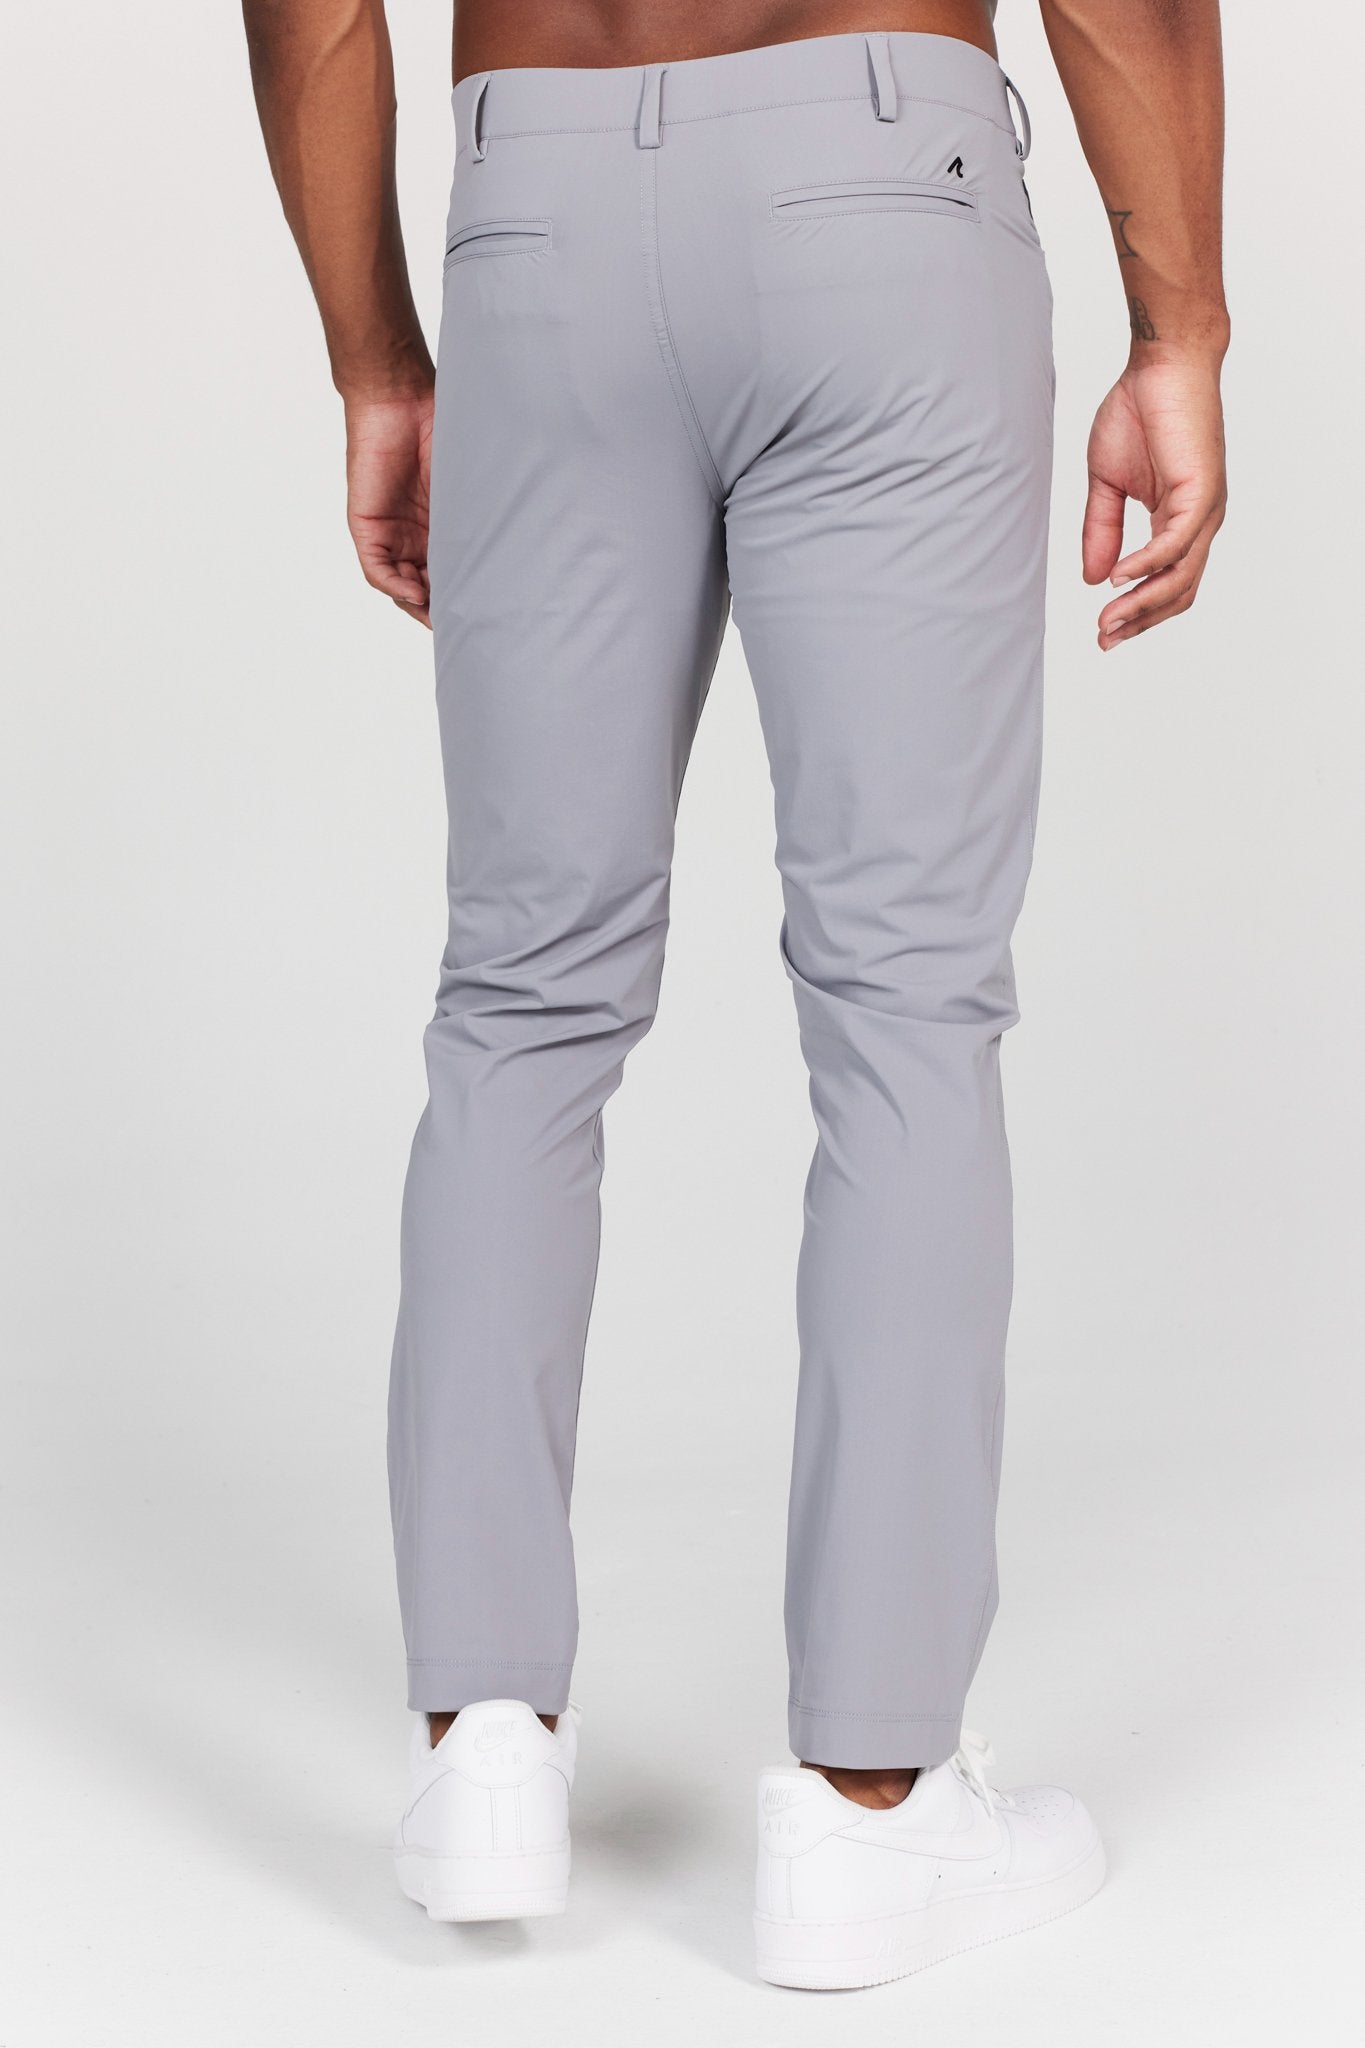 Ladies Golf Trousers | Love Golf Clothes